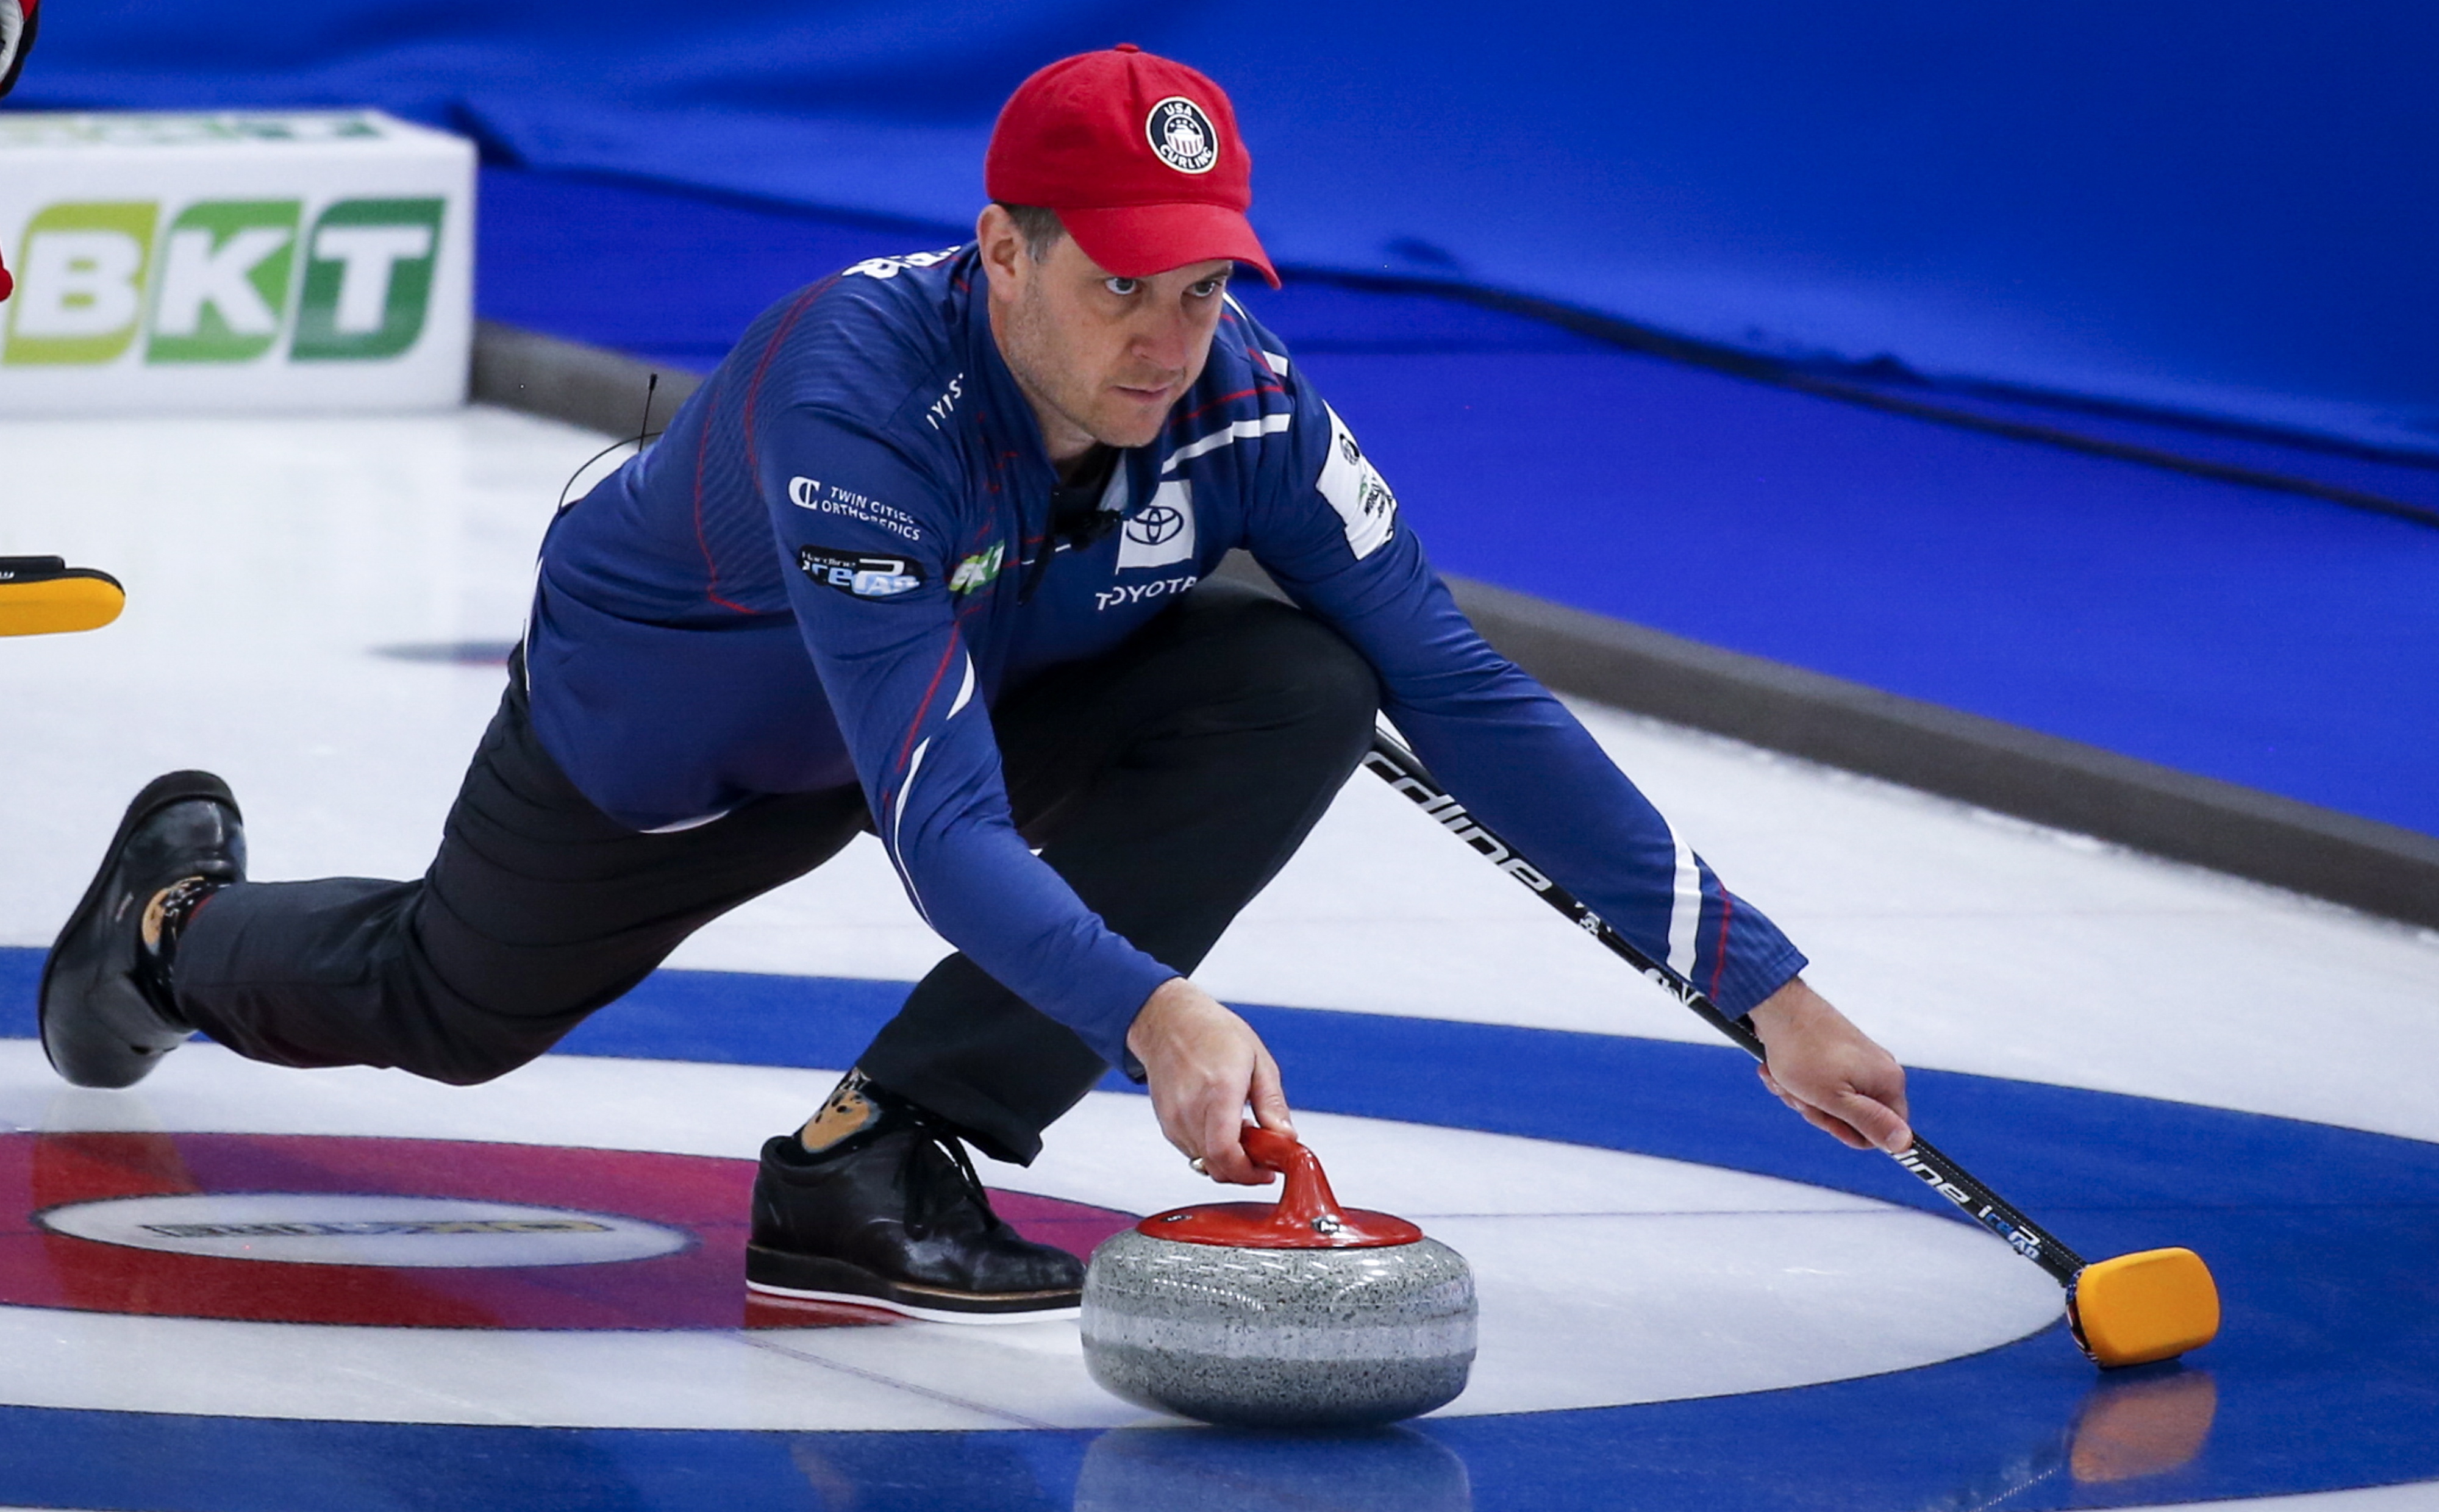 USA vs. Canada Live stream, start time, TV channel, how to watch Mens Curling Championship 2021 (Mon